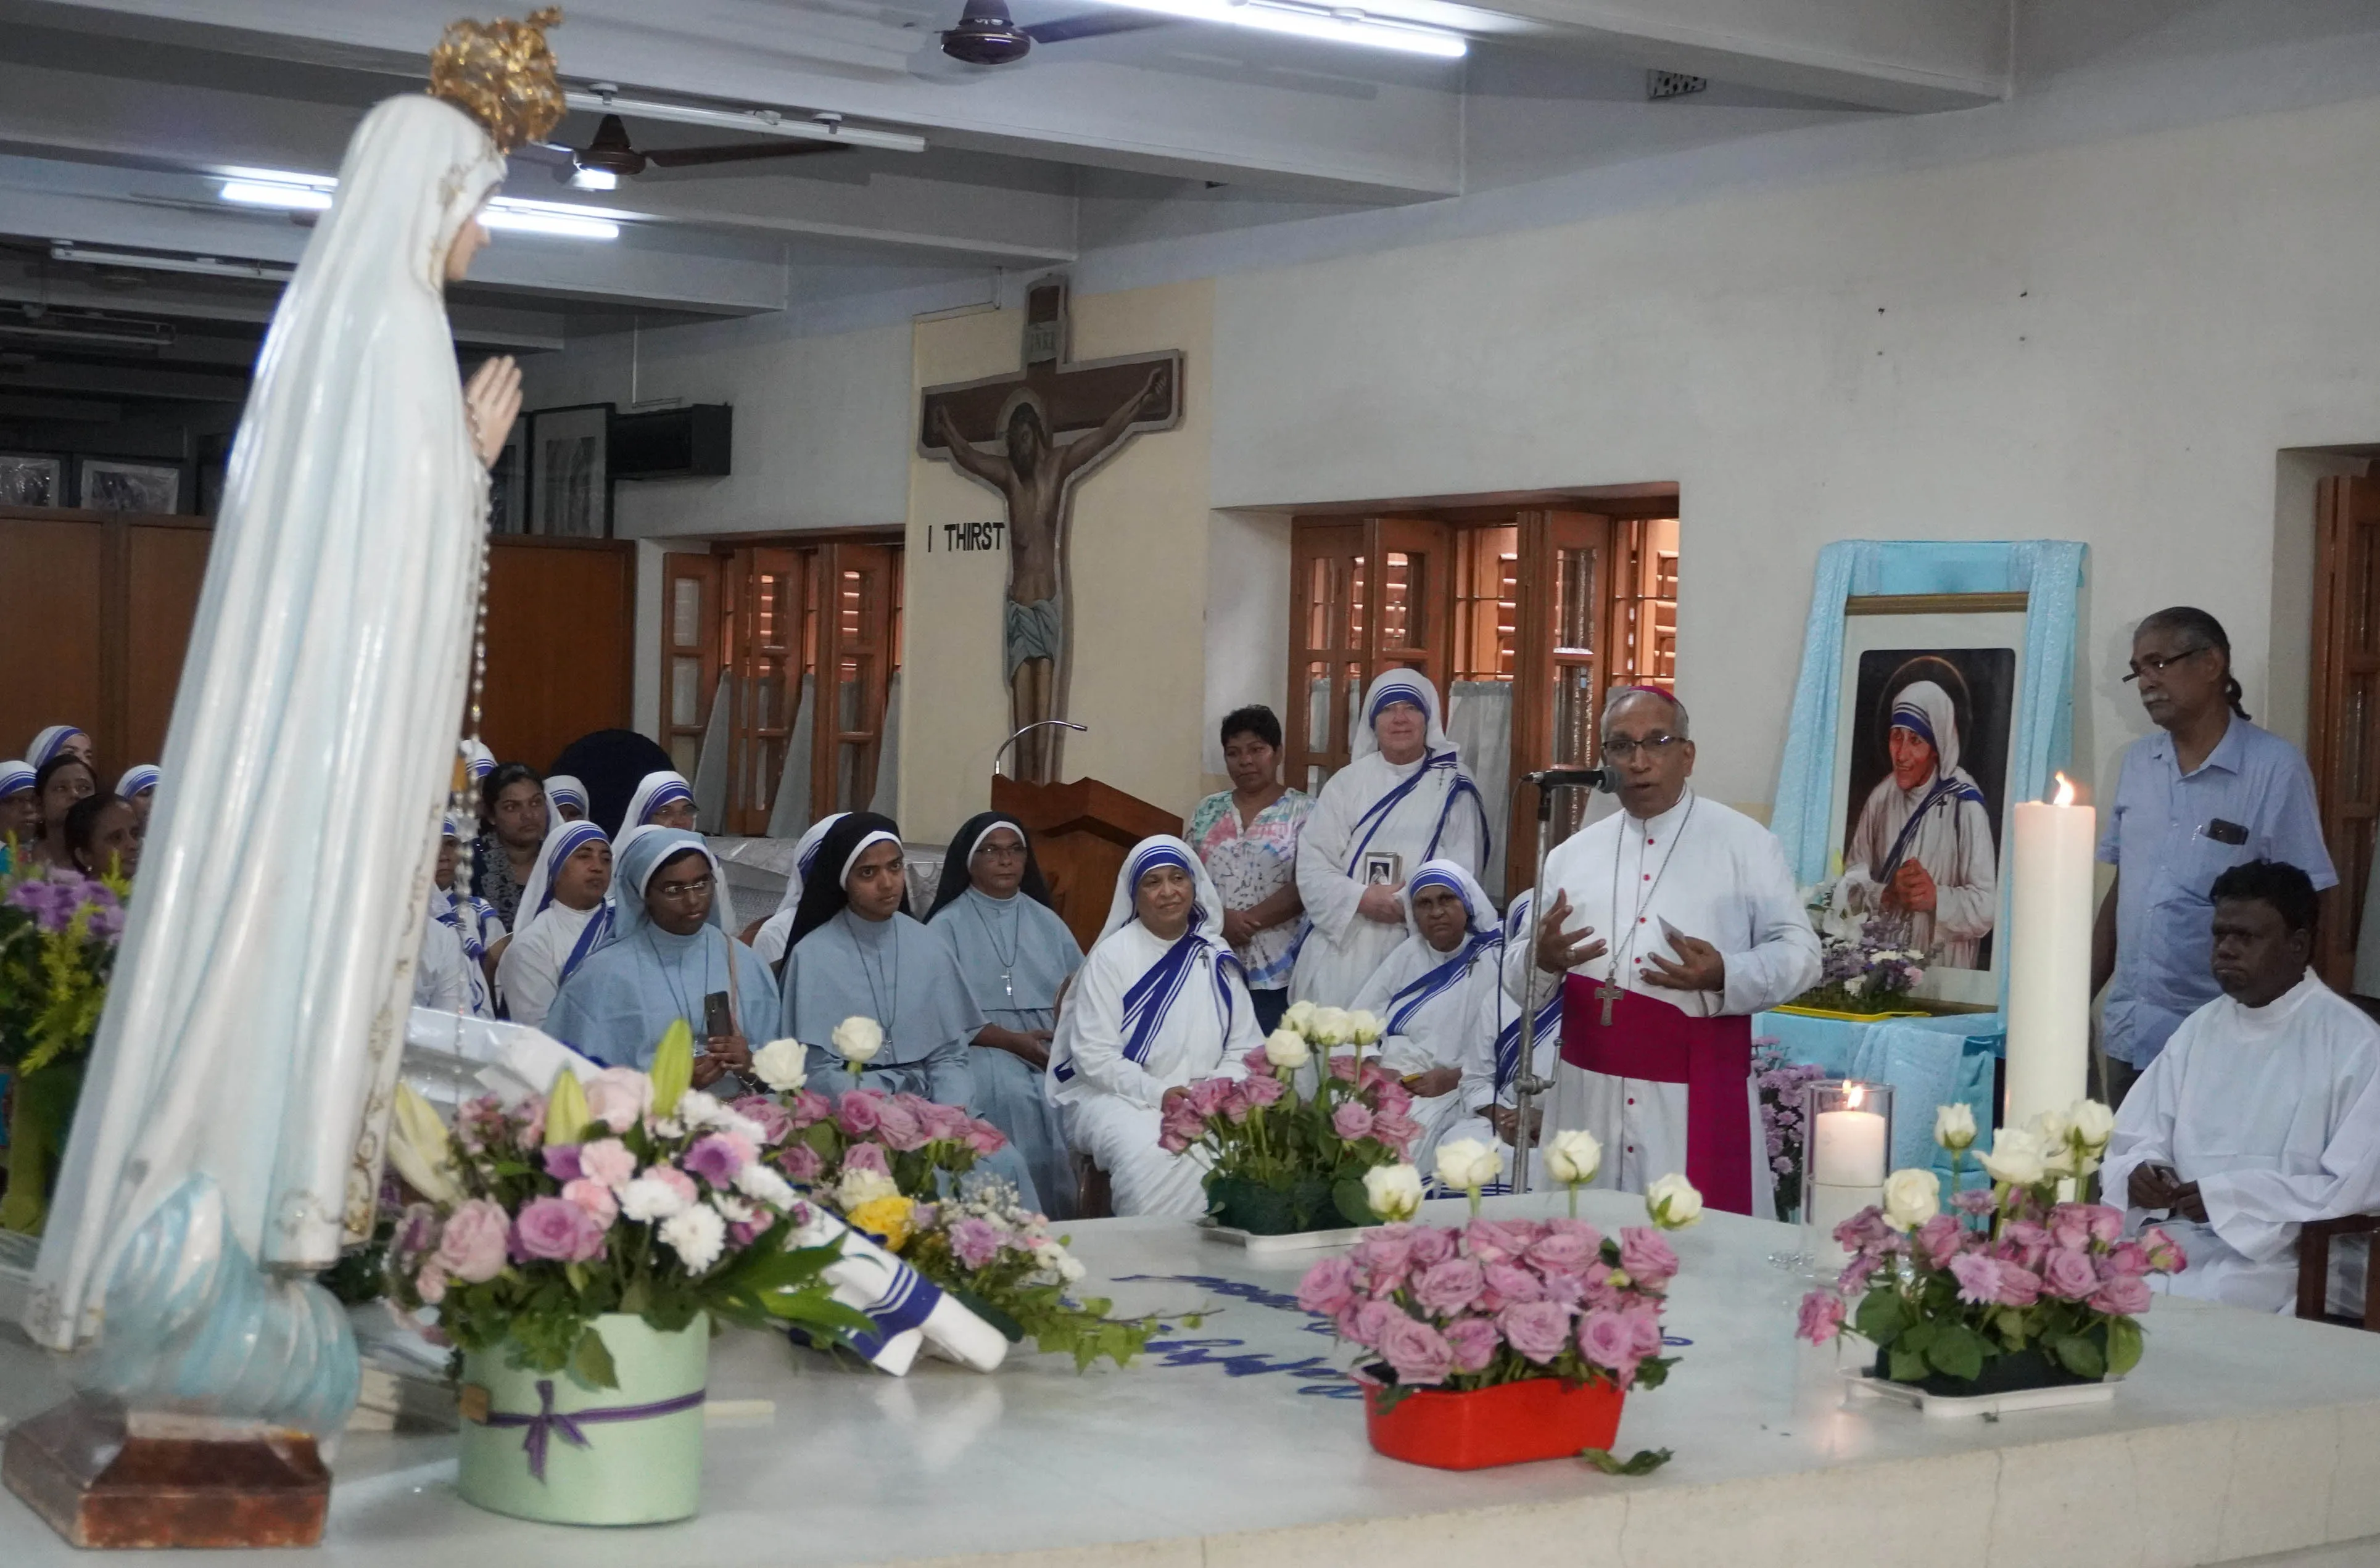 Kolkata Archbishop Thomas D’Souza gives a message at the tomb of St. Teresa of Kolkata in the Missionaries of Charity motherhouse in Kolkata, India, after a Mass on her feast day, Sept. 5, 2023.?w=200&h=150